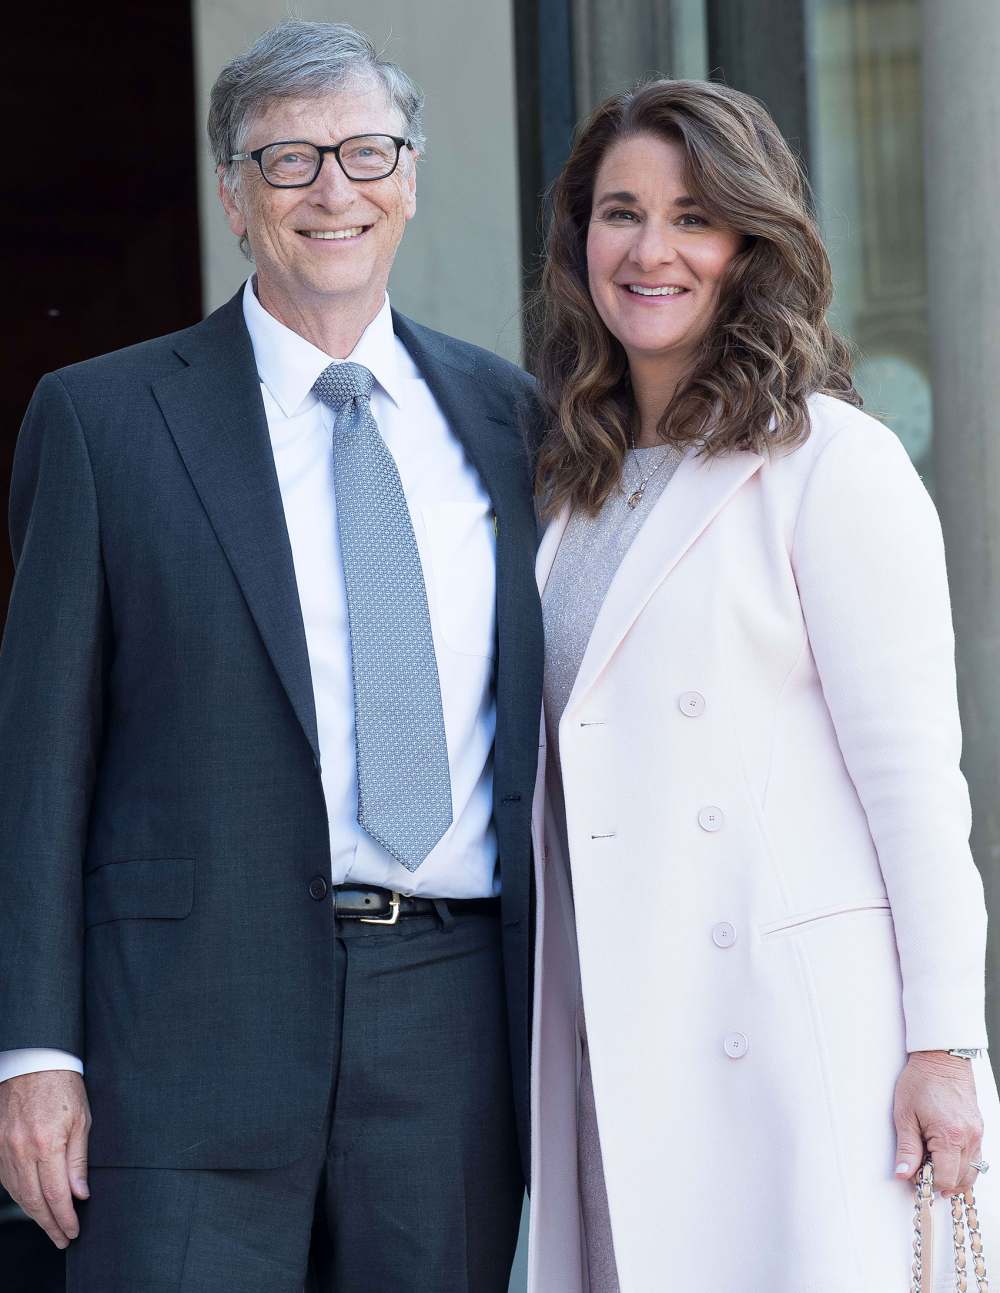 Did Bill Gates and Melinda Gates Have a Prenup? An Expert Weighs In